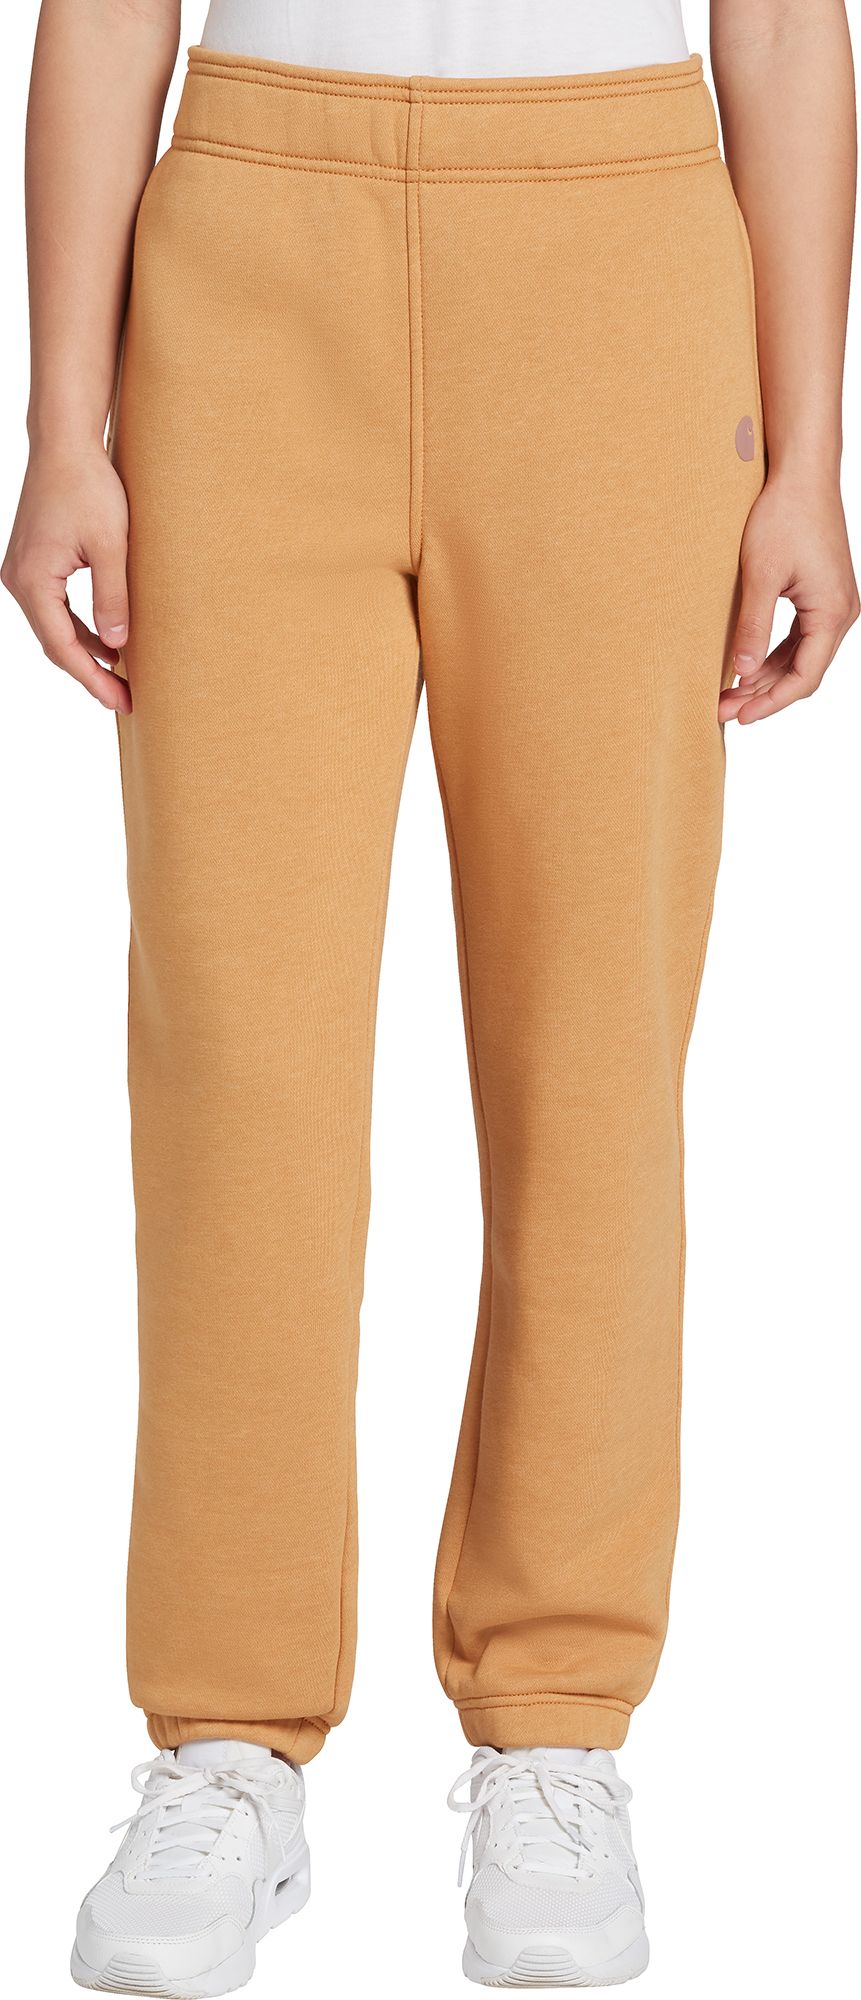 Carhartt Womens Relaxed Fit Joggers